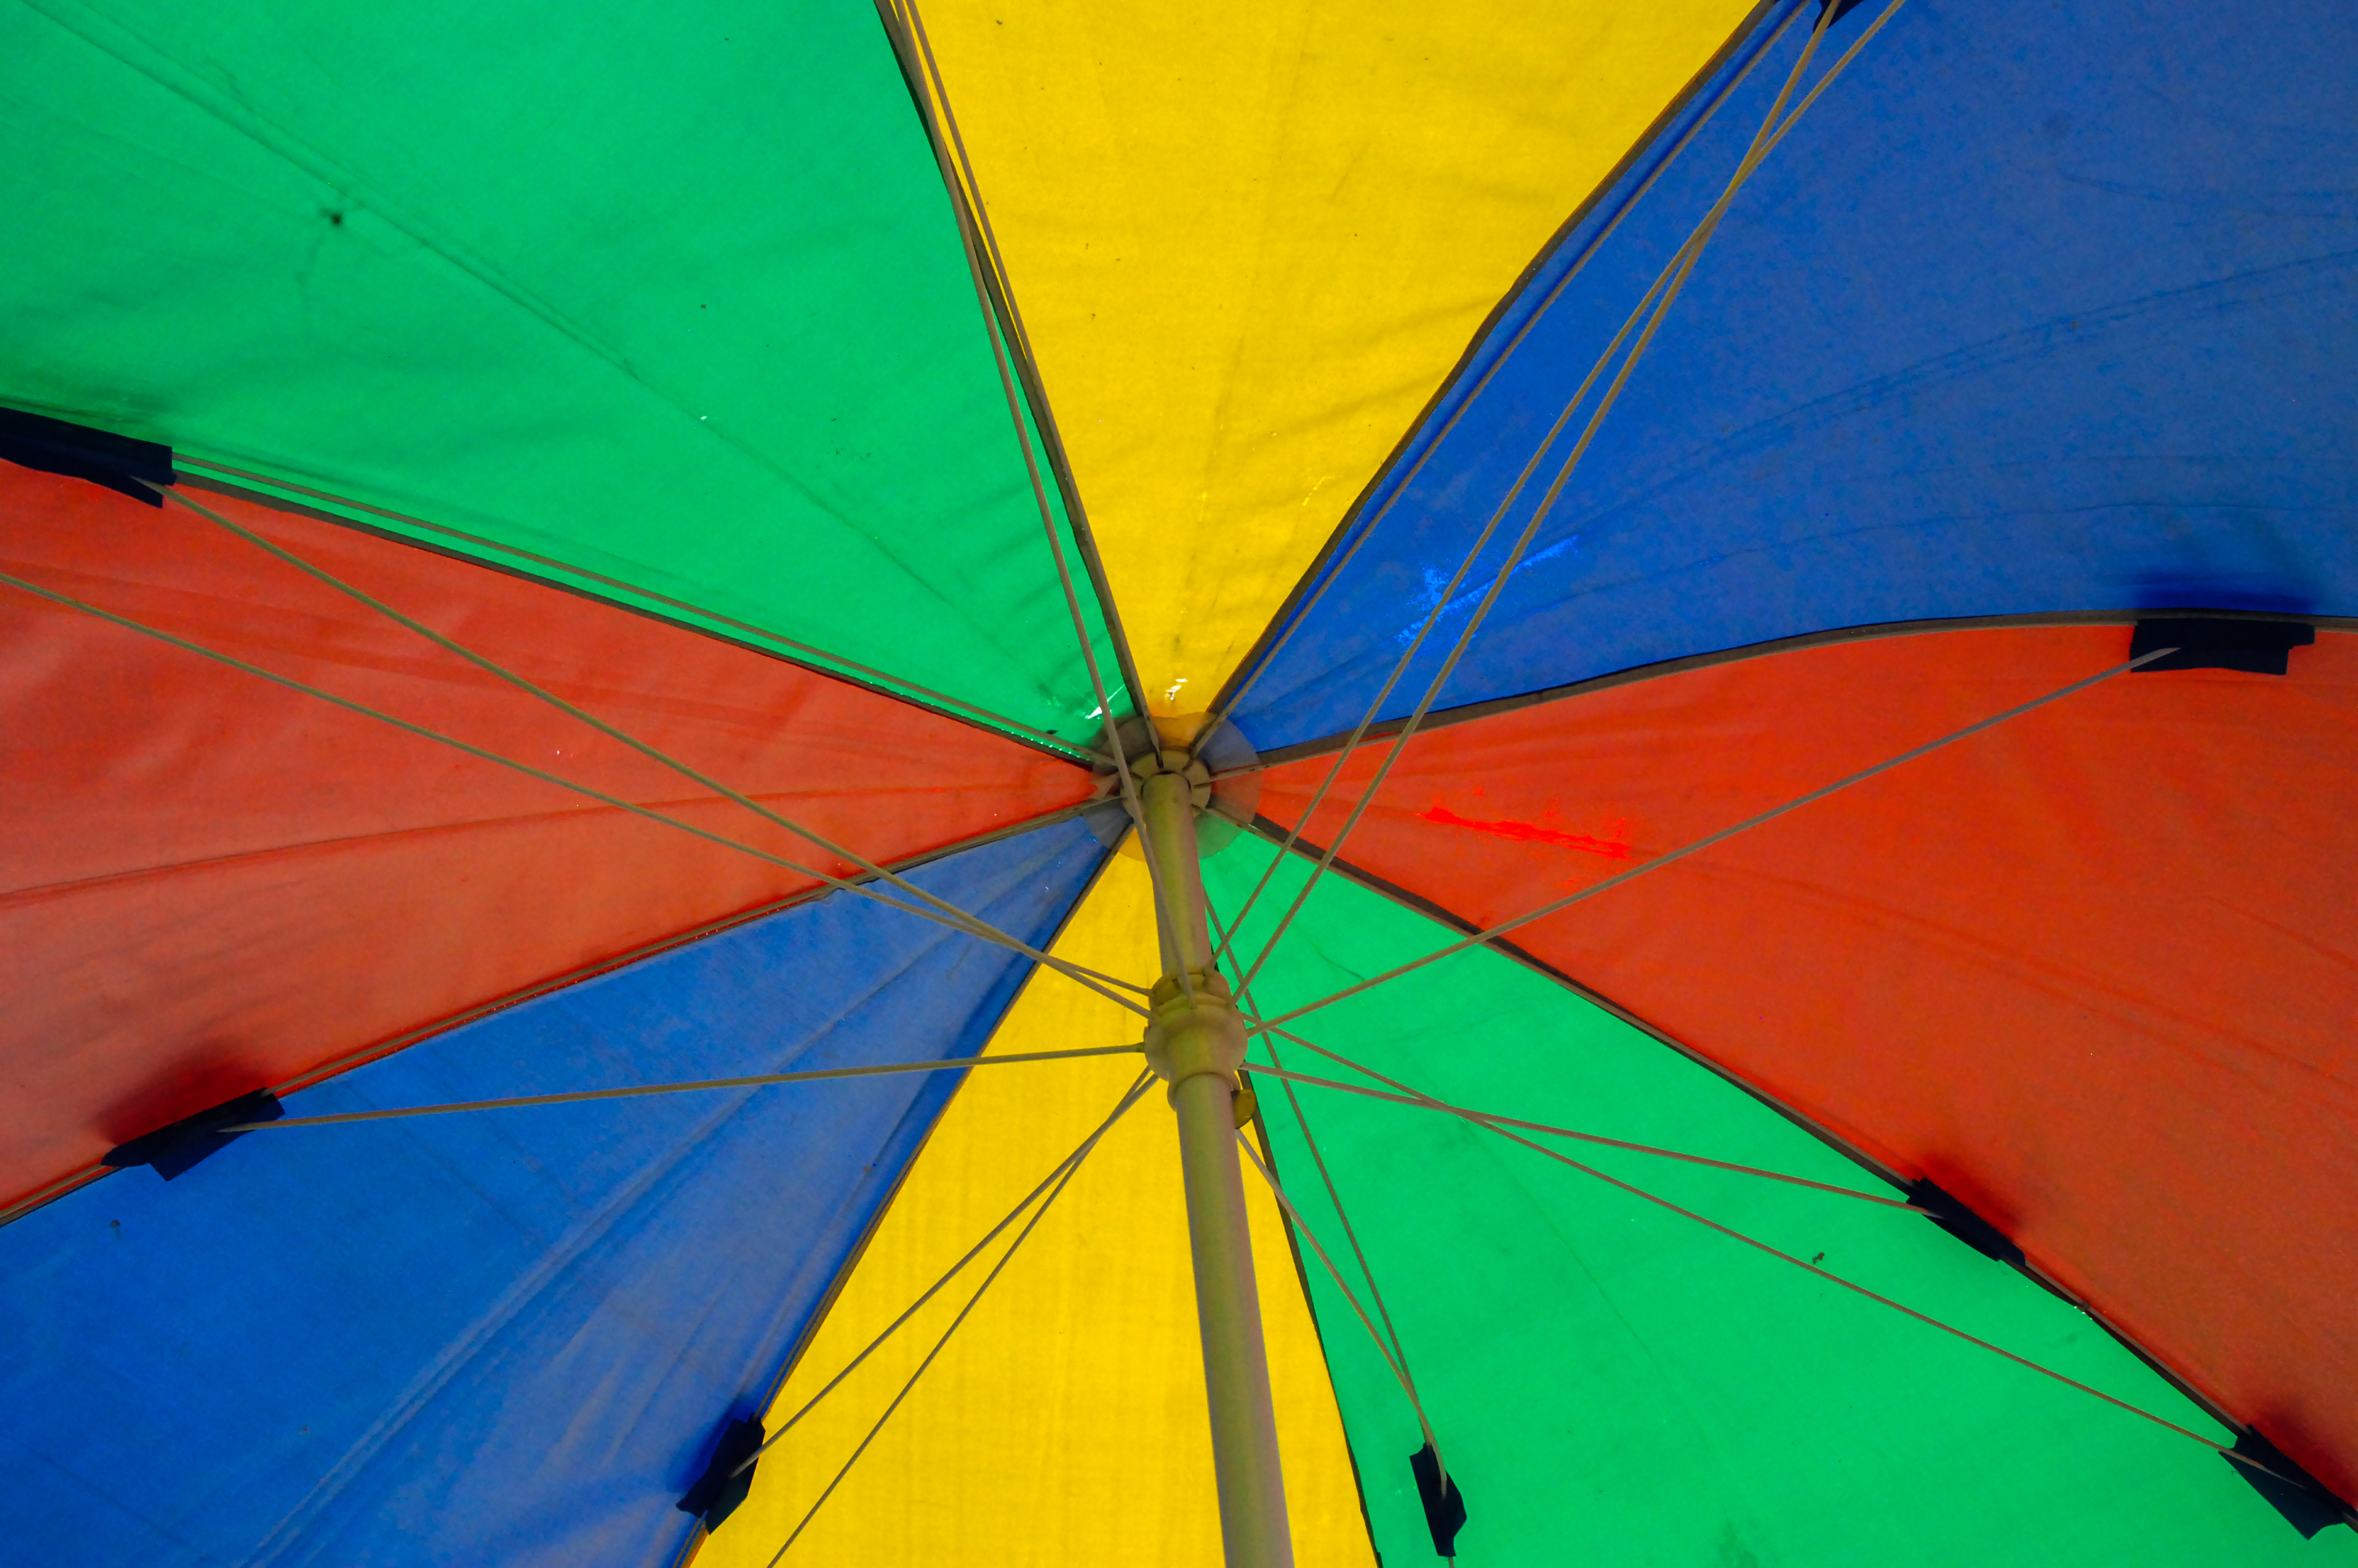 Where is my umbrella she asked. Colorful object.